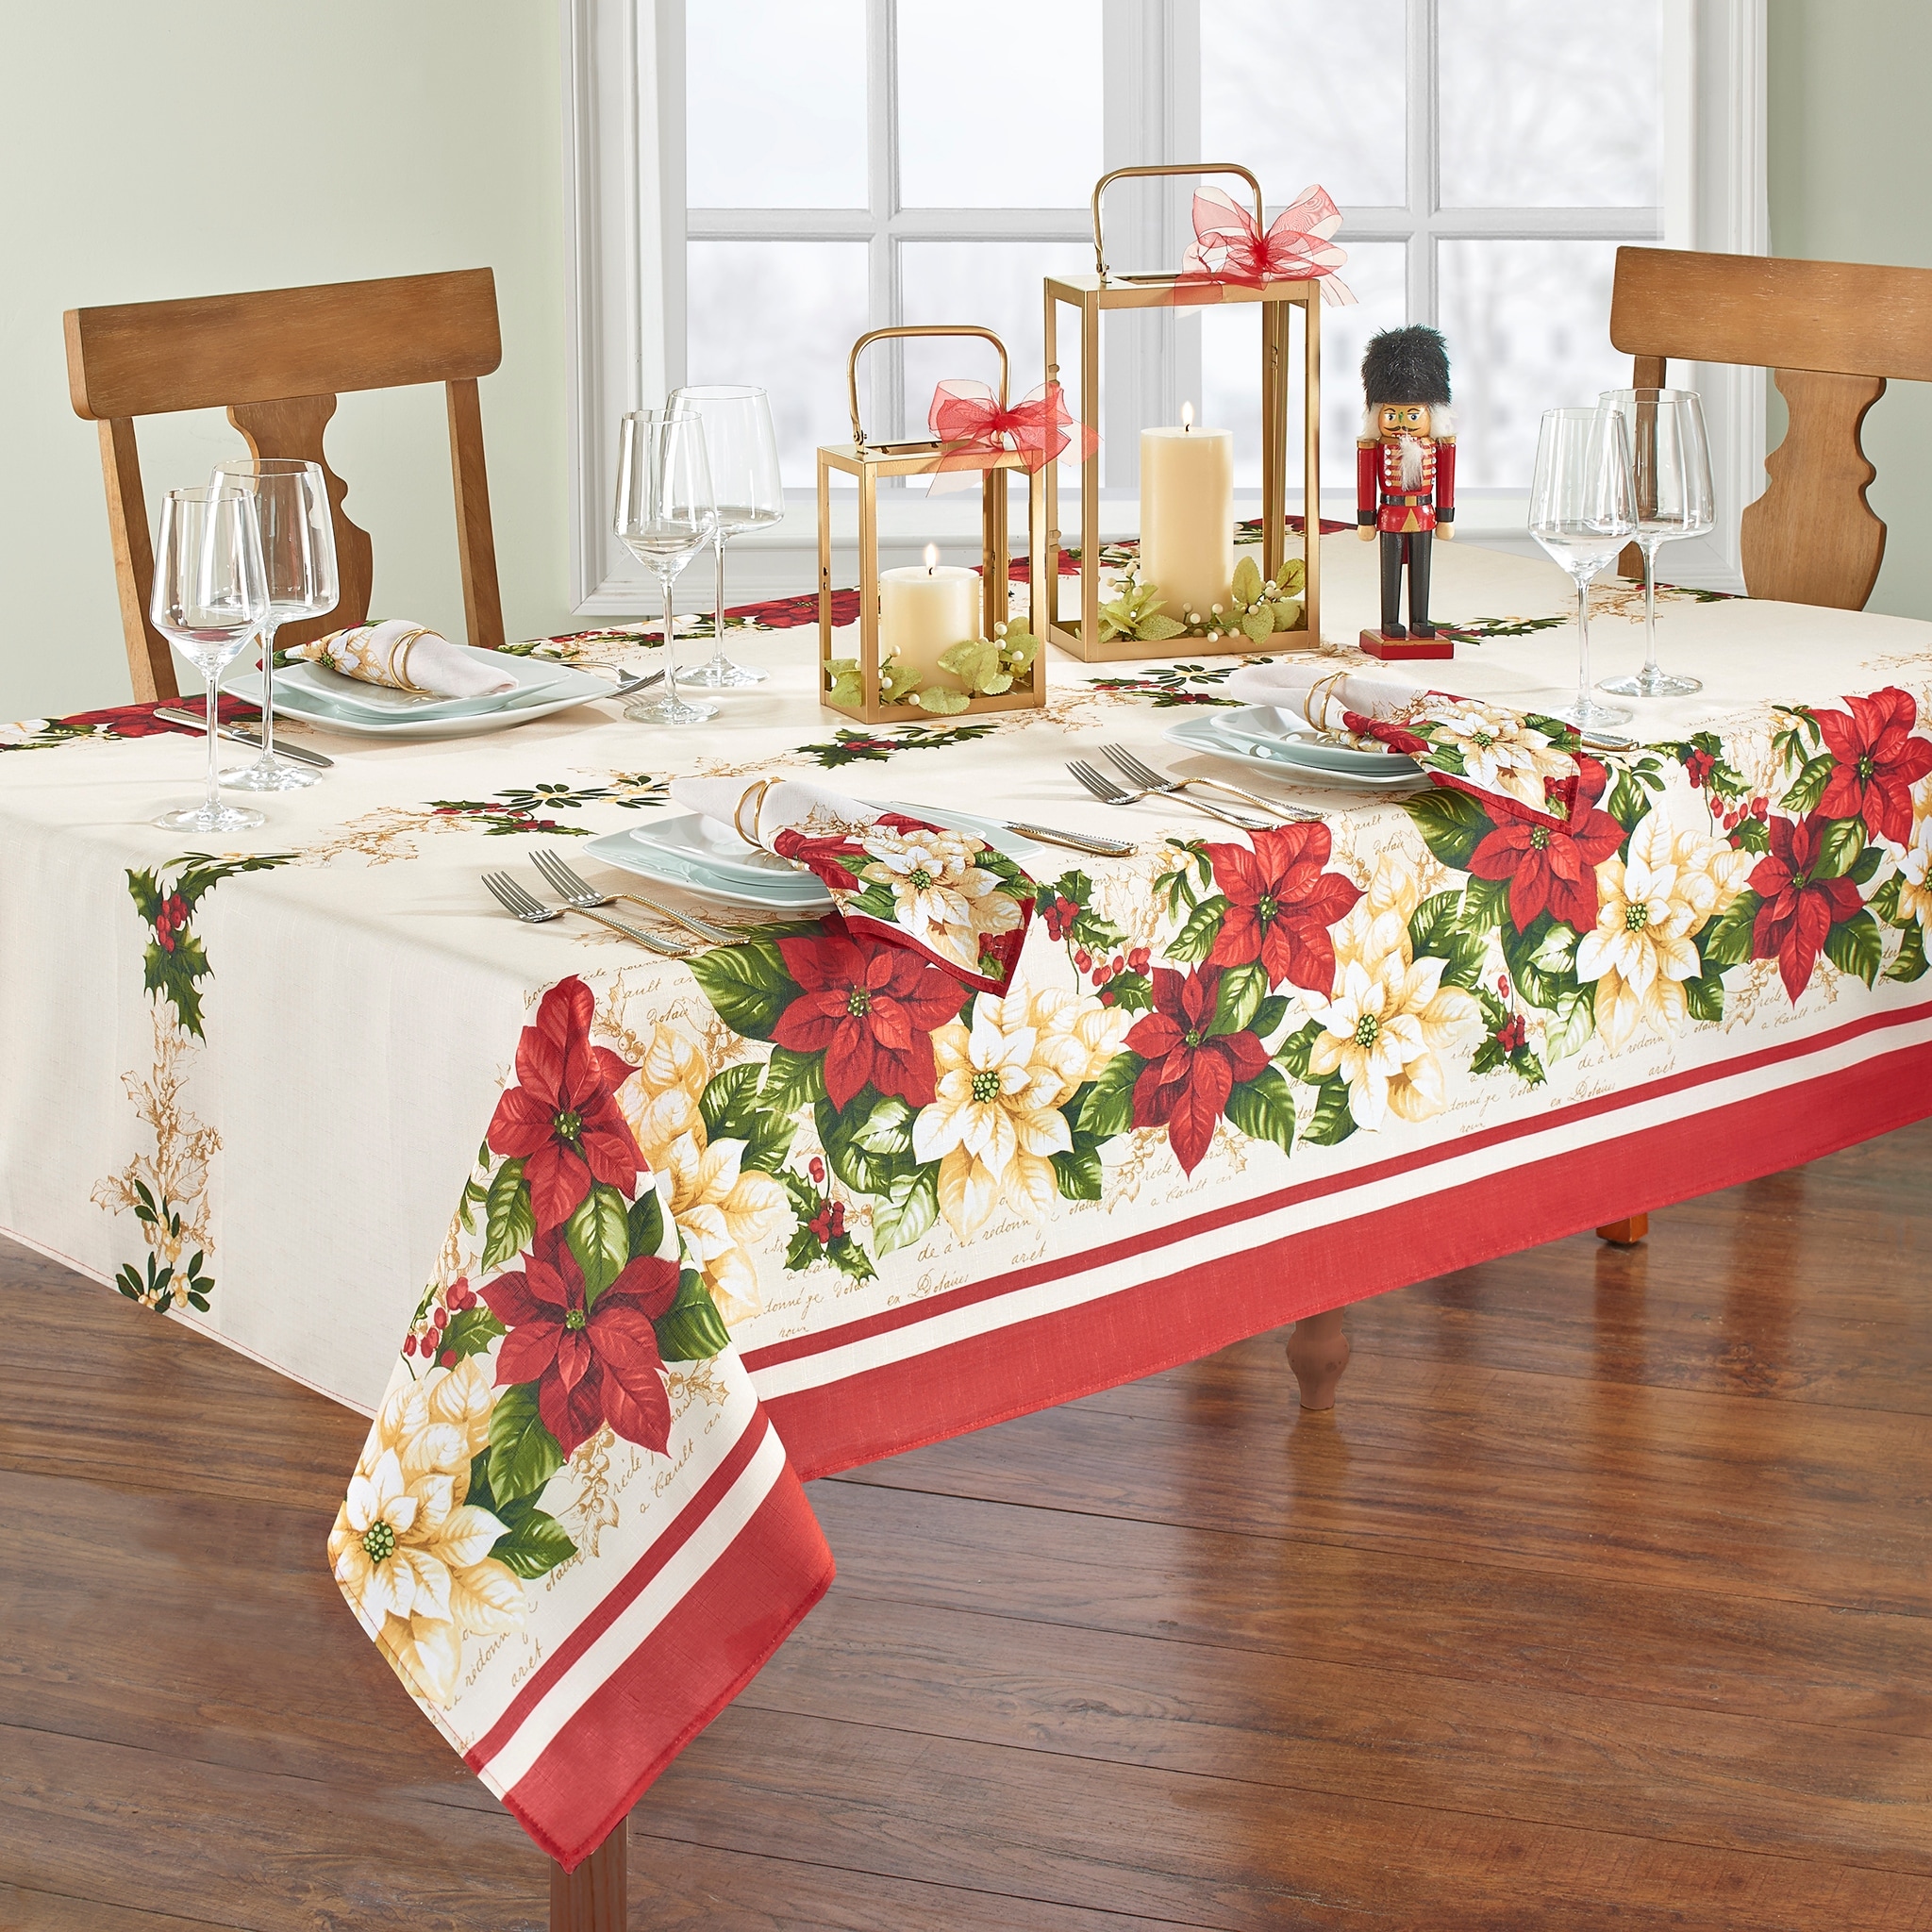 https://ak1.ostkcdn.com/images/products/is/images/direct/f7becaddf86a5919bfd2ecc53a6250cd3400c751/Red-and-White-Poinsettia-Tablecloth.jpg